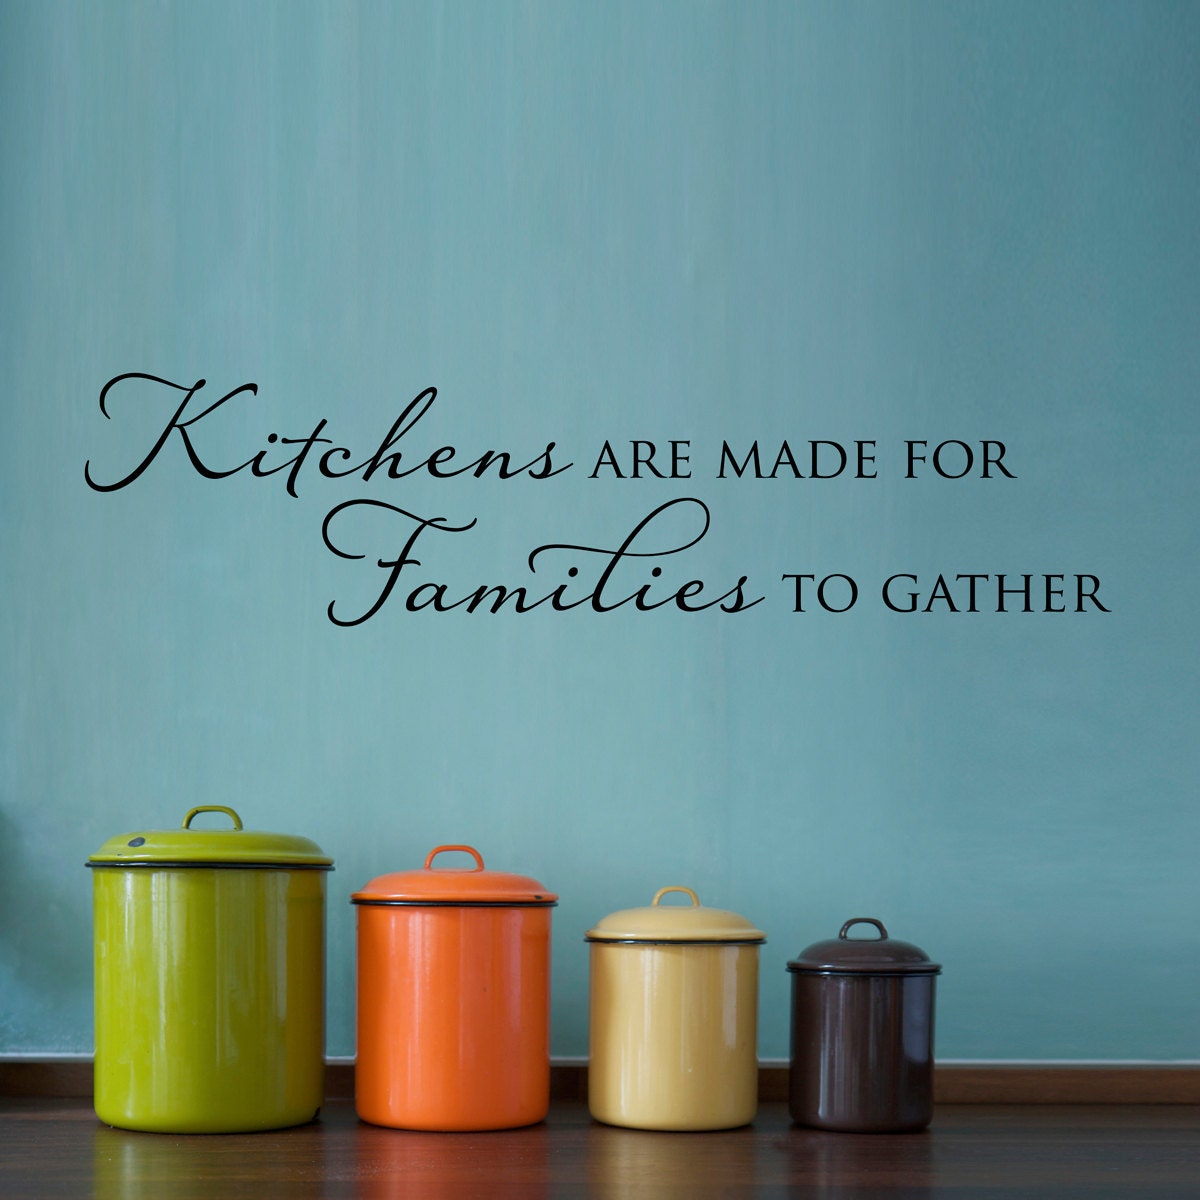 Kitchens are made for Families to gather Decal - Kitchen Wall Decal - Family Wall Decal - Kitchen Wall Sticker